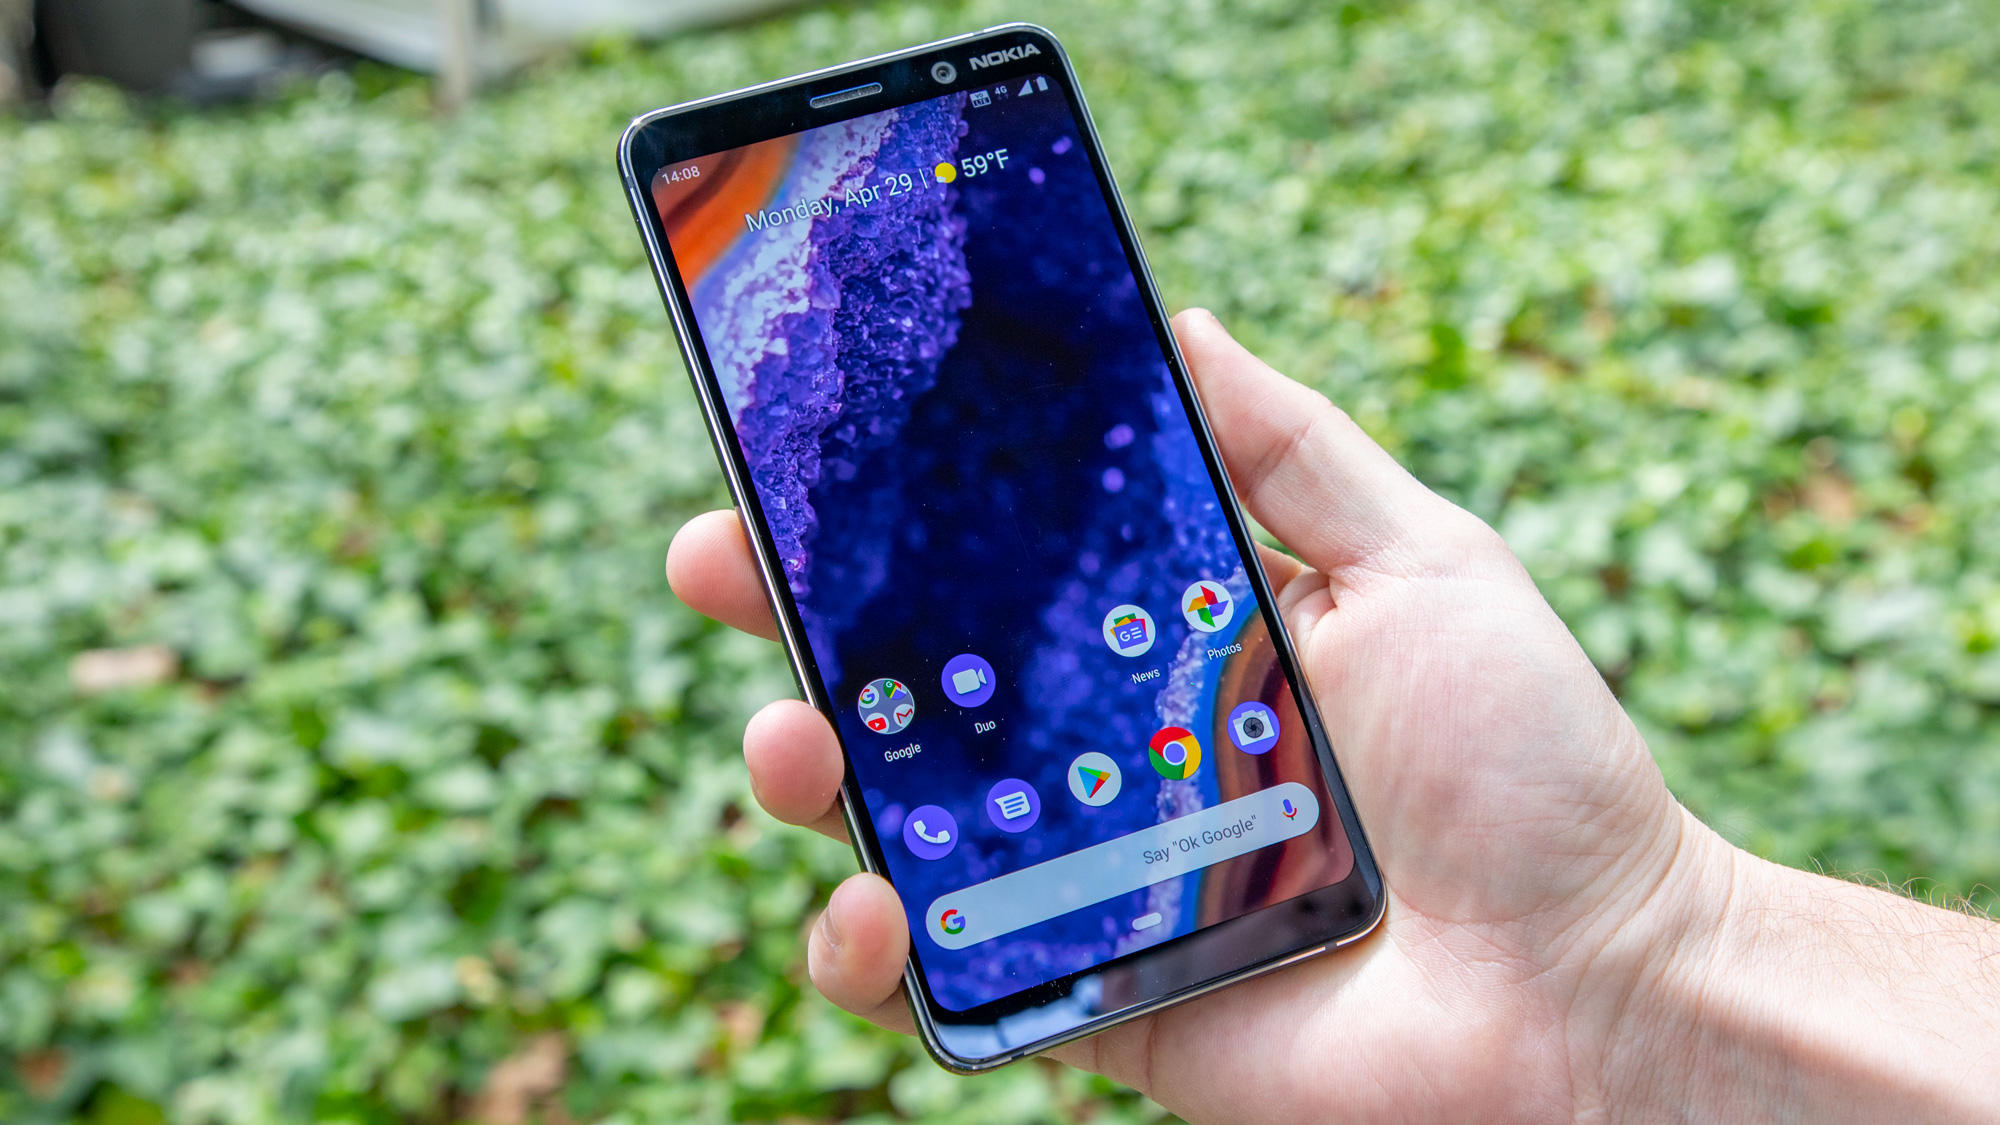 The Nokia 9 PureView was a highlight of MWC 2019